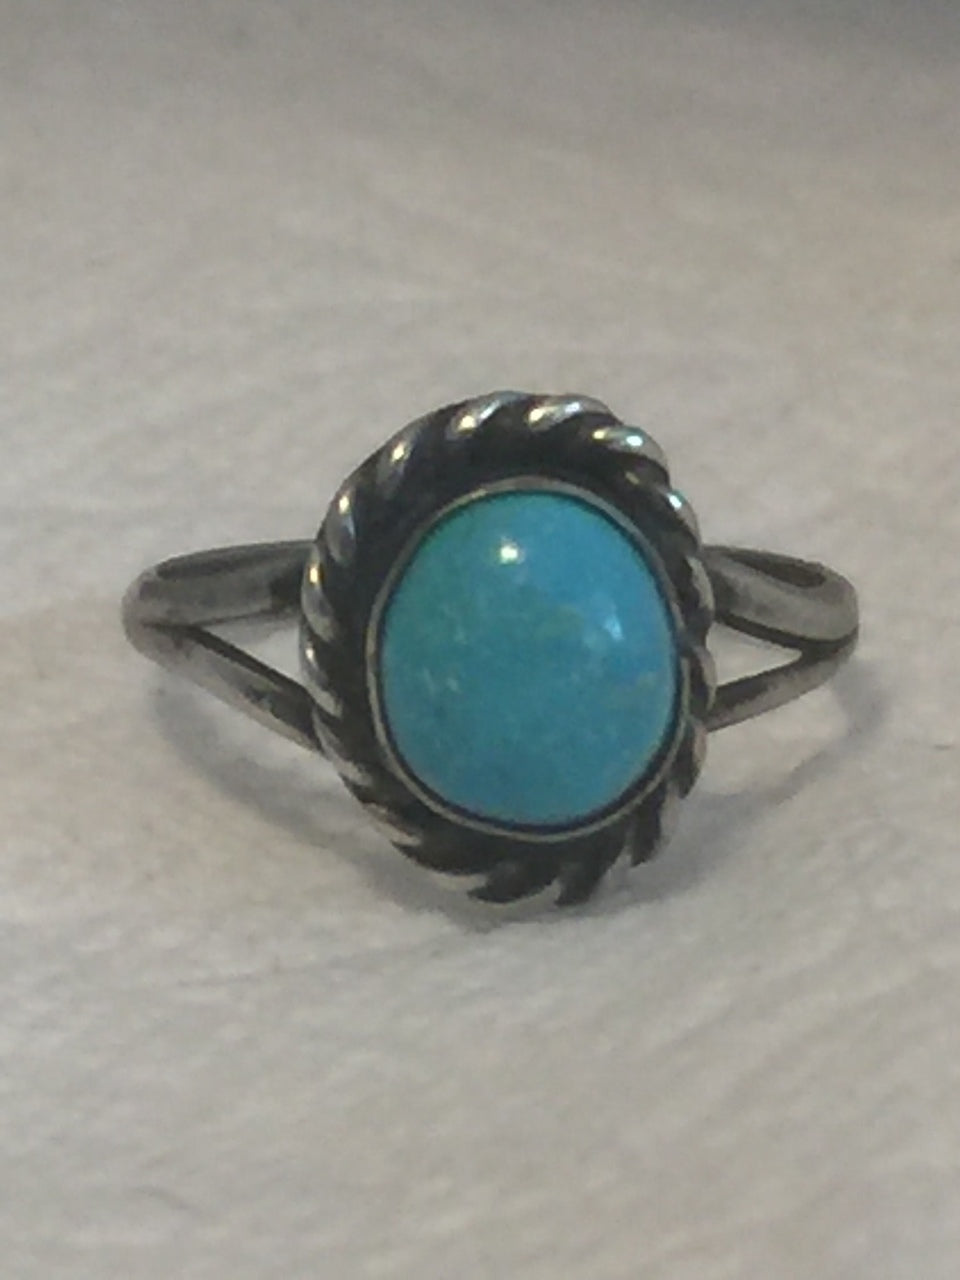 Vintage Sterling Silver Southwest Tribal Turquoise Ring Size 6 2.3g